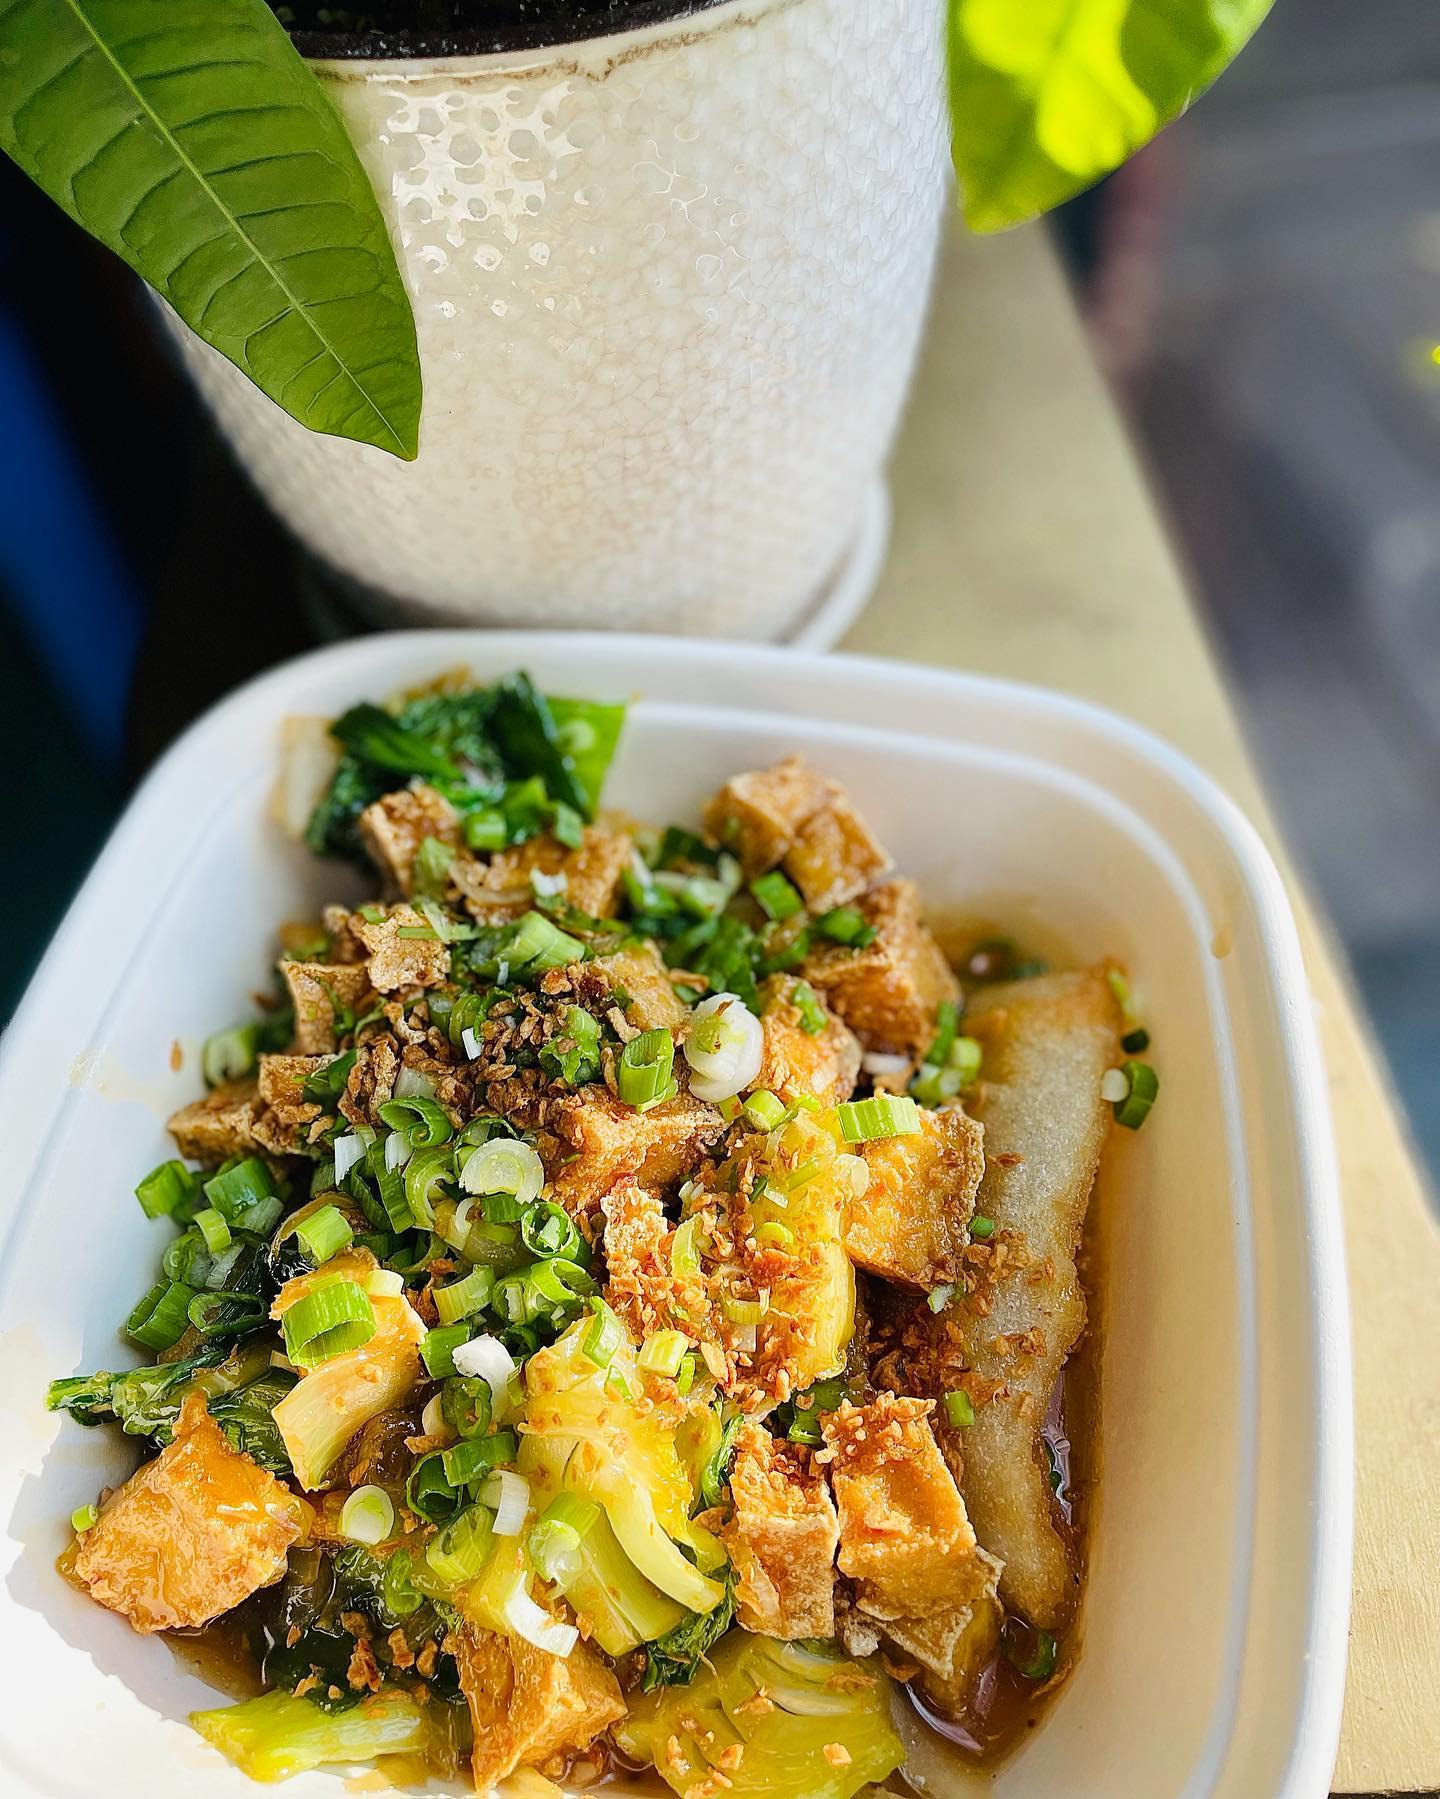 Monday lunch: Ho Fun with tofu at @ahanmadison 😍
📸: @therealscript